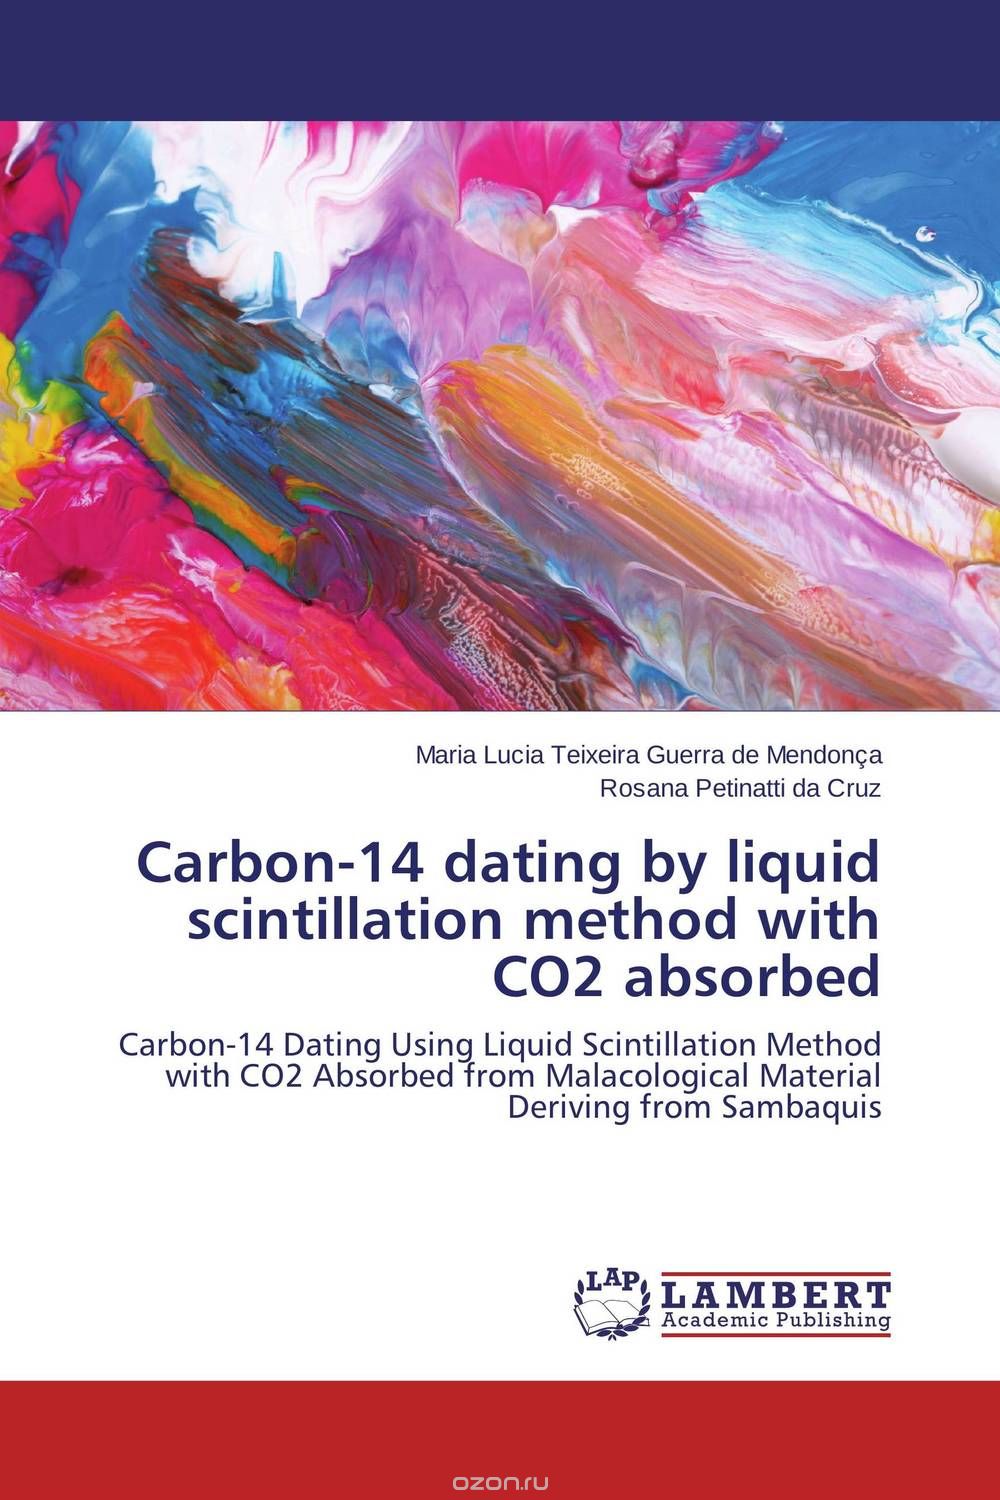 Скачать книгу "Carbon-14 dating by liquid scintillation method with CO2 absorbed"